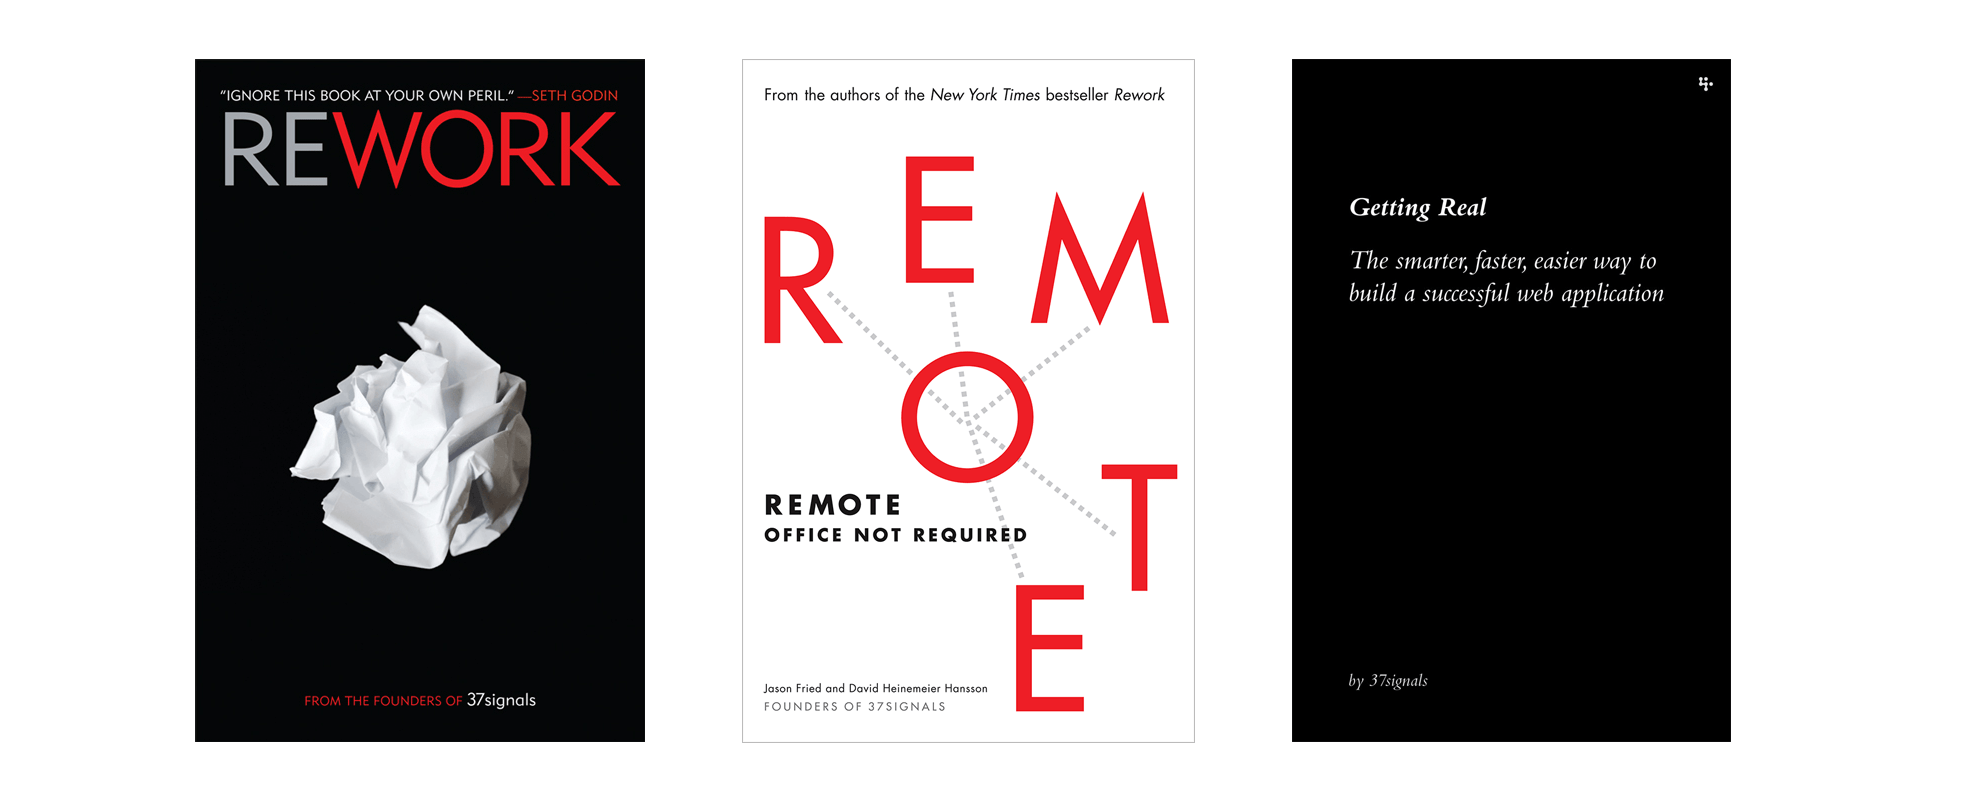 Covers of the 3 books that the Basecamp team have written – Getting Real, Rework and Remote